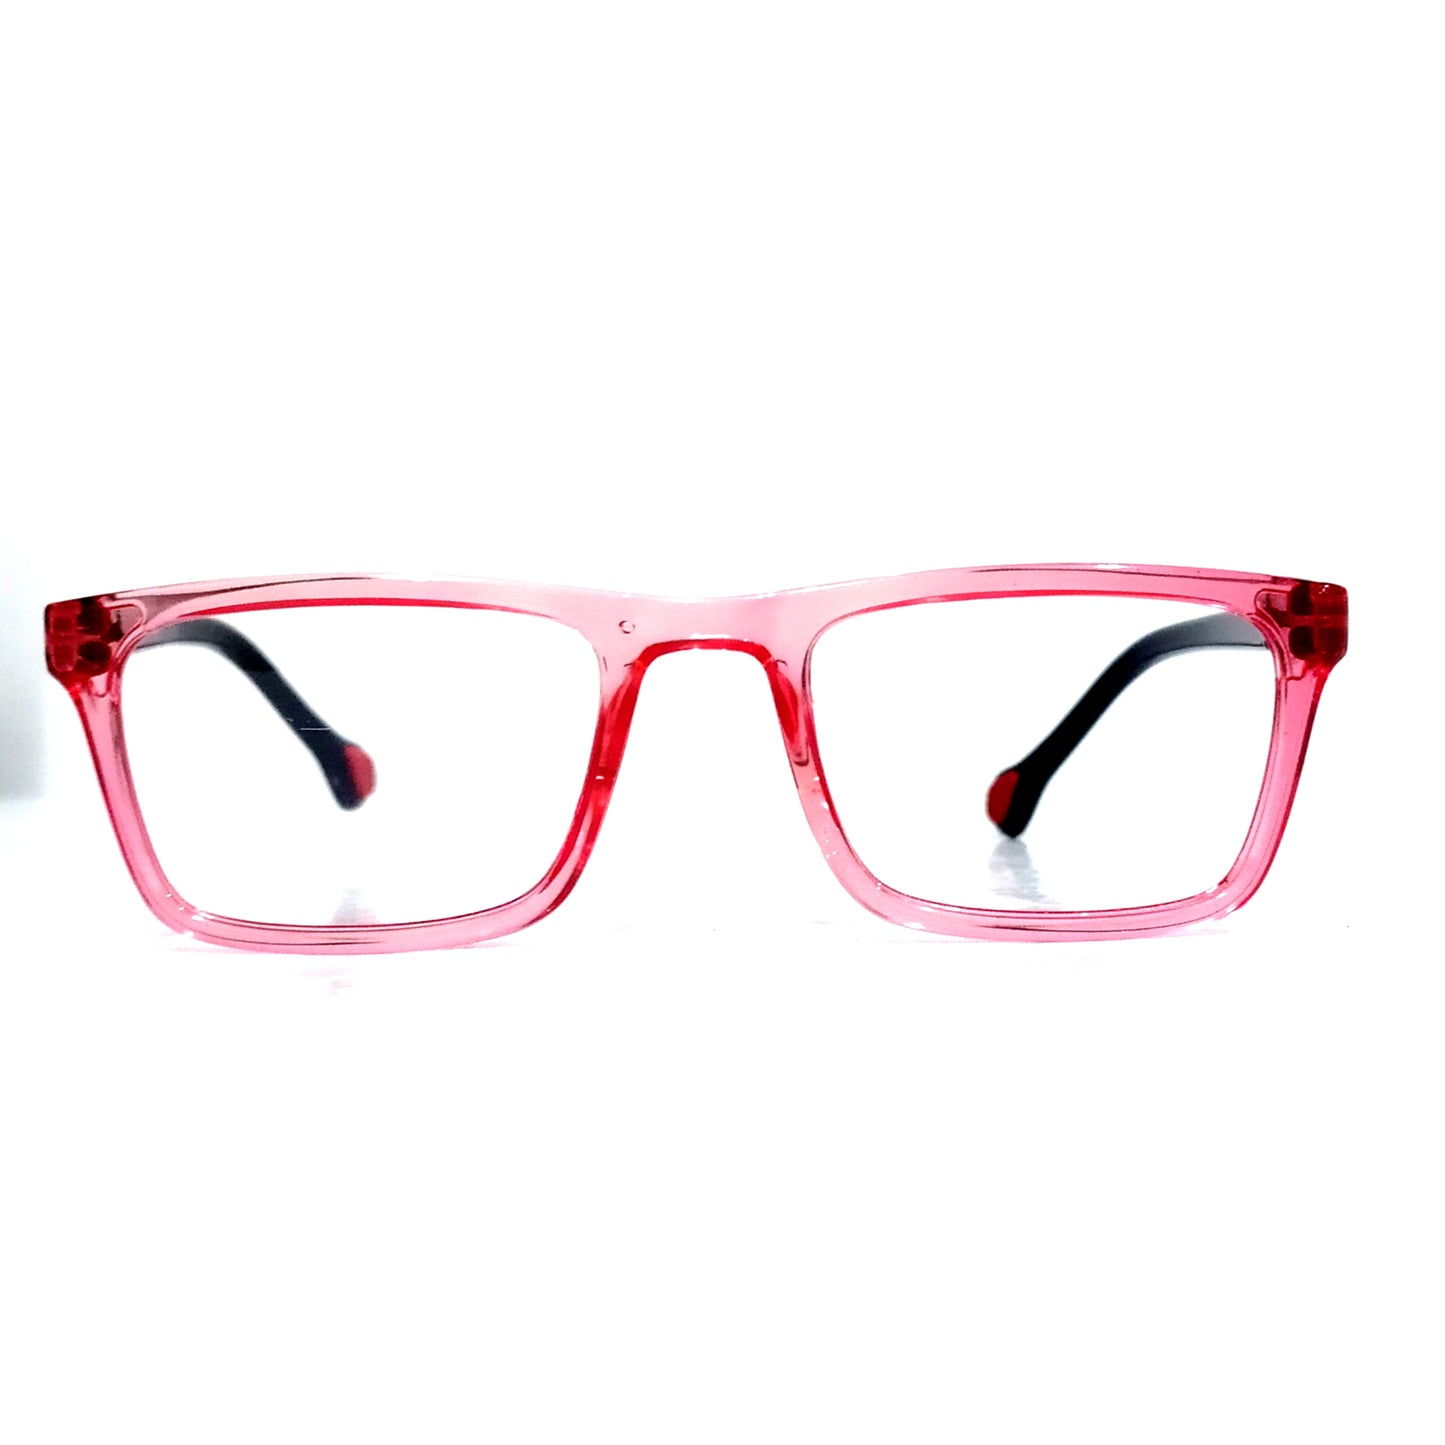 Transparent Red Front Kids Spectacle Frames for 4-6 Years Old